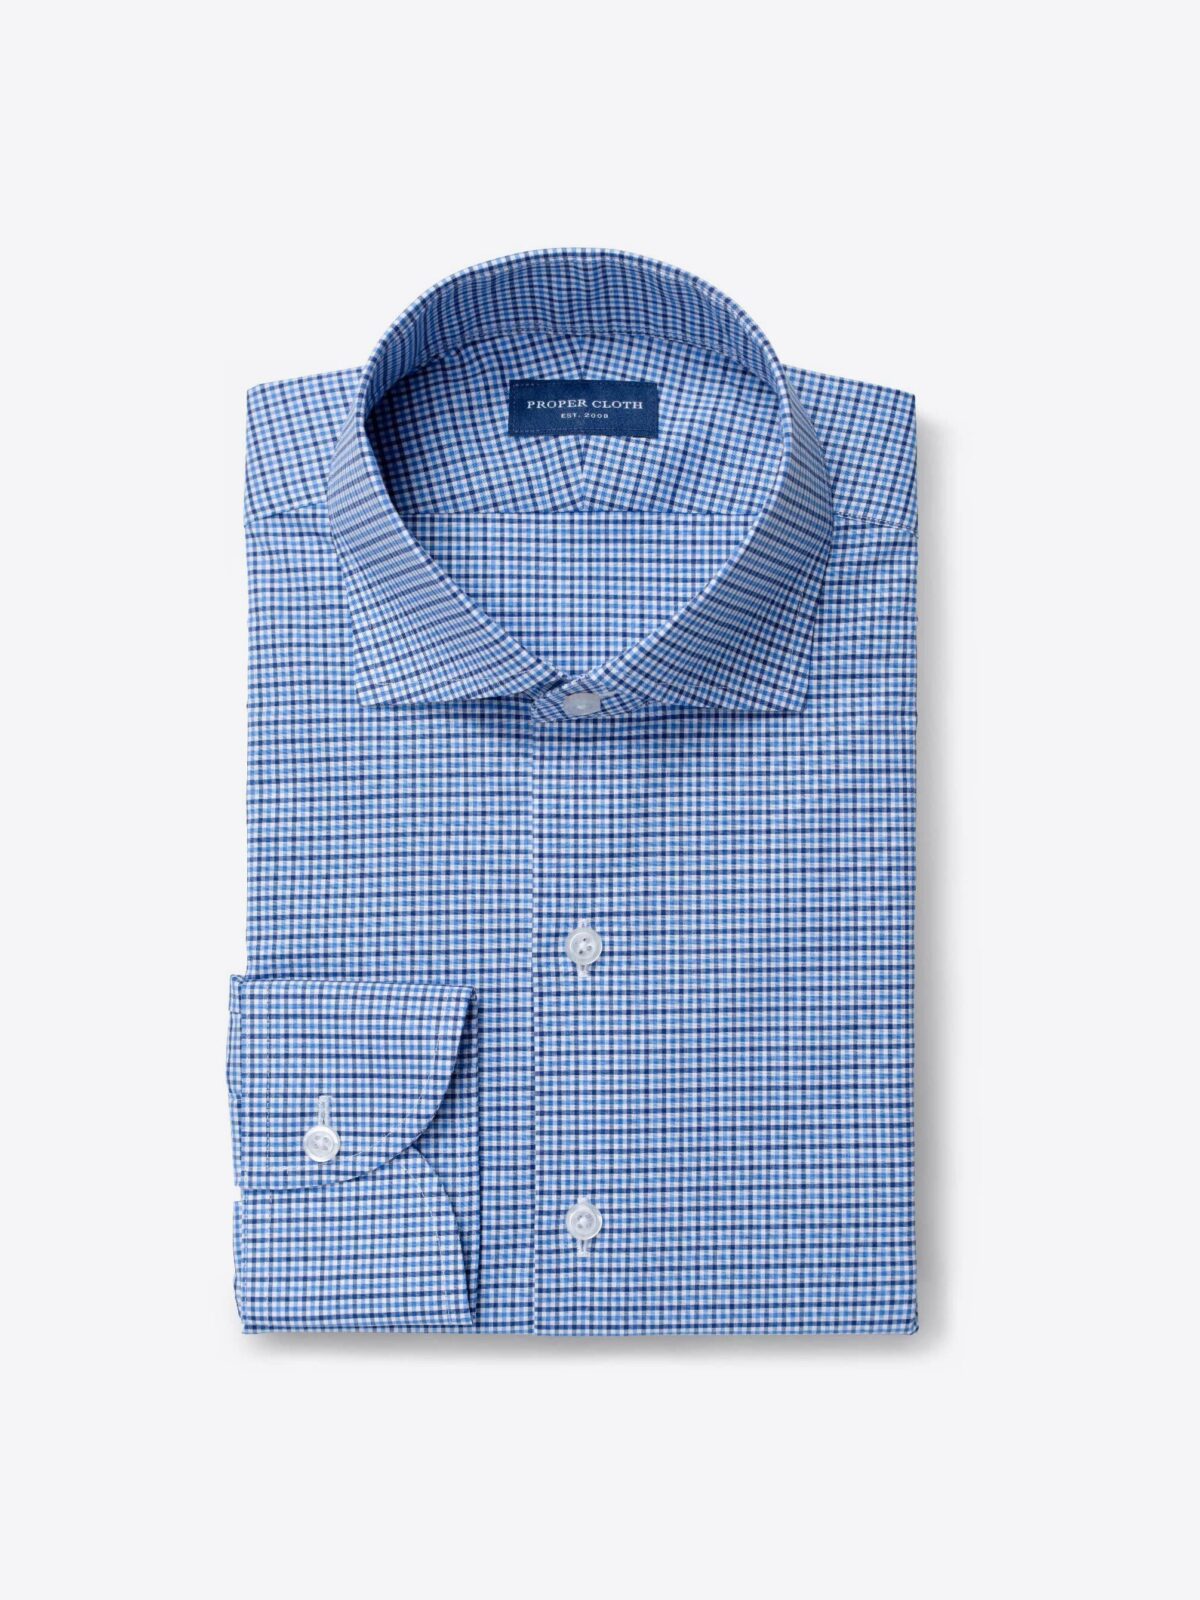 Waverly Light Blue and Navy 120s Small Gingham Shirt by Proper Cloth